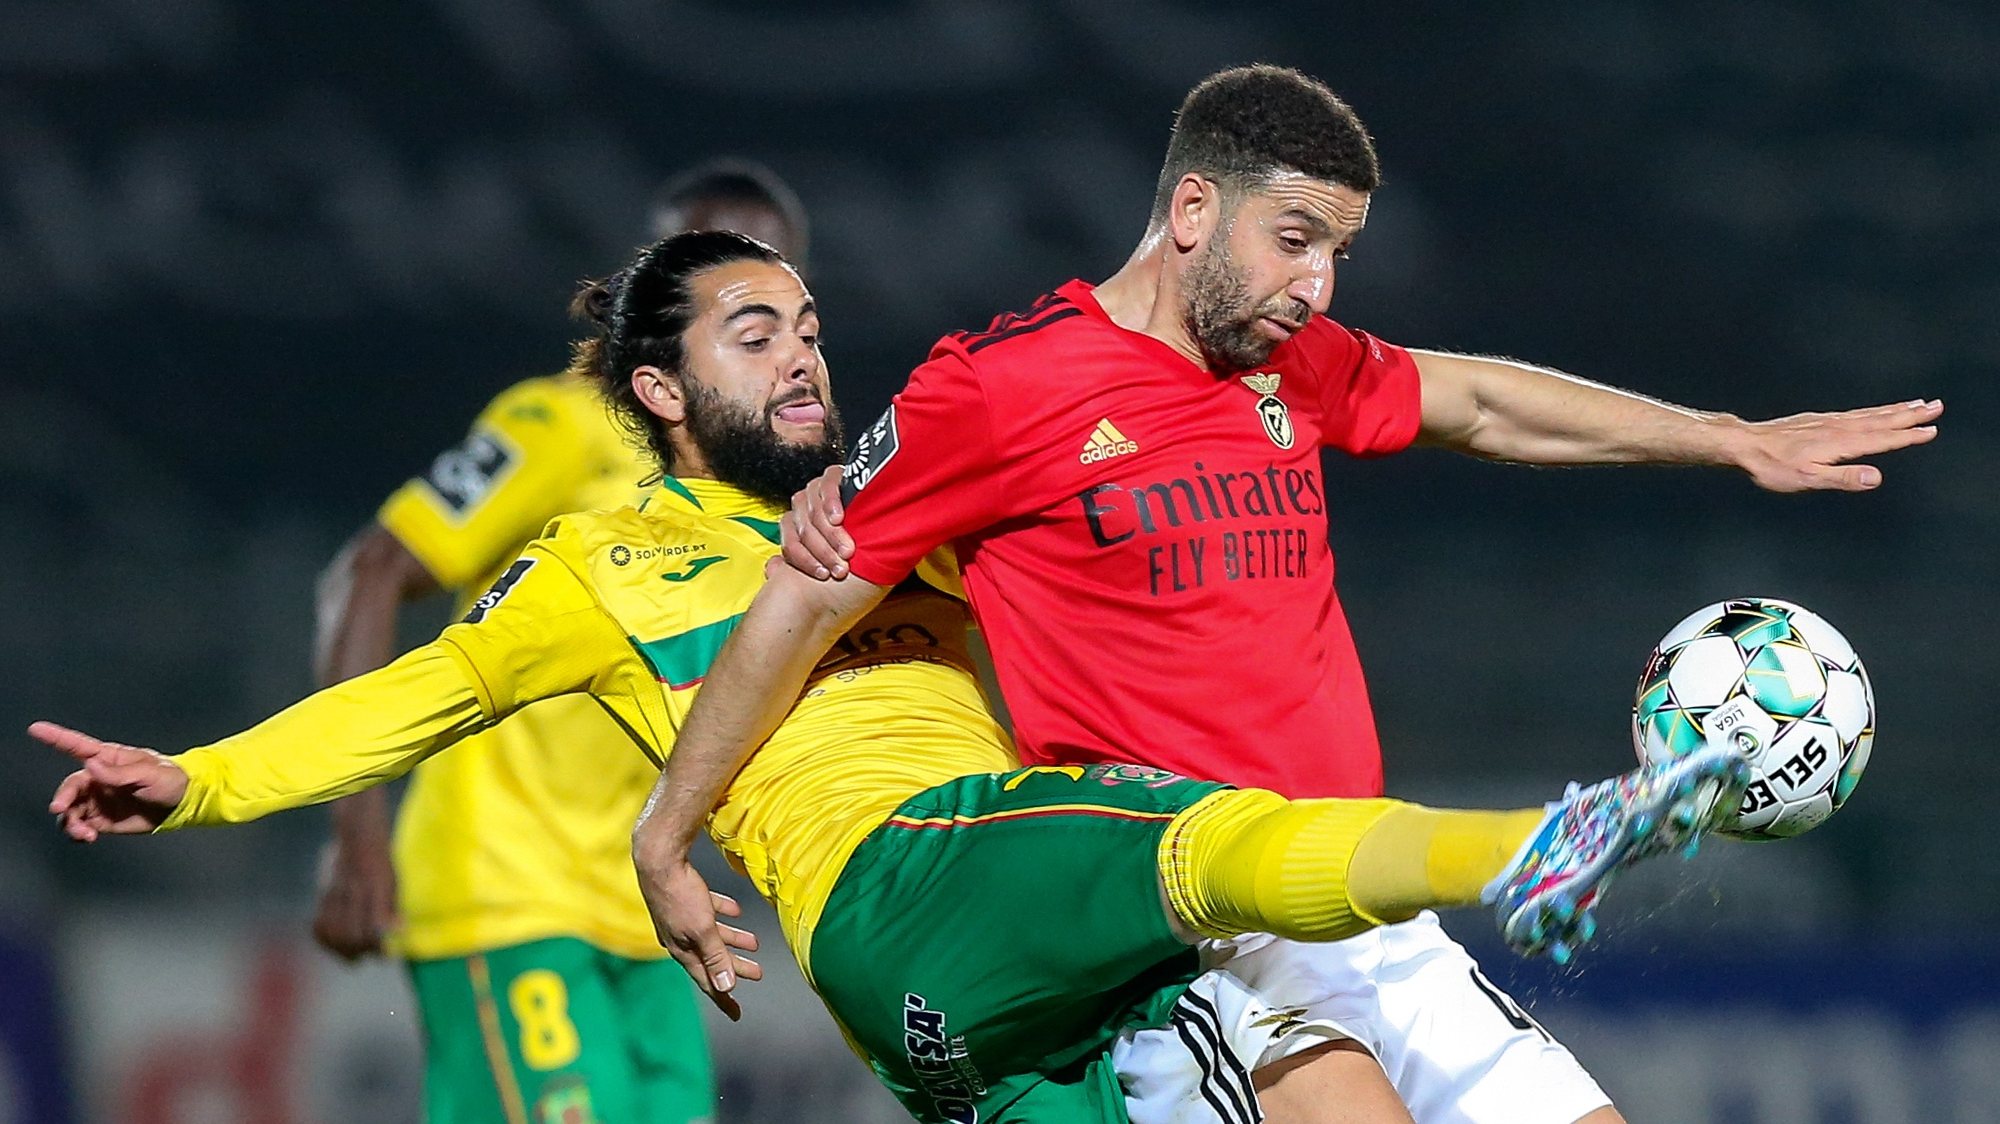 Pacos de Ferreira&#039;s Joao Amaral (L) in action against Benfica&#039;s Adel Taarabt during their Portuguese First League soccer match held in Pacos de Ferreira, Portugal, 10 April 2021. JOSE COELHO/LUSA